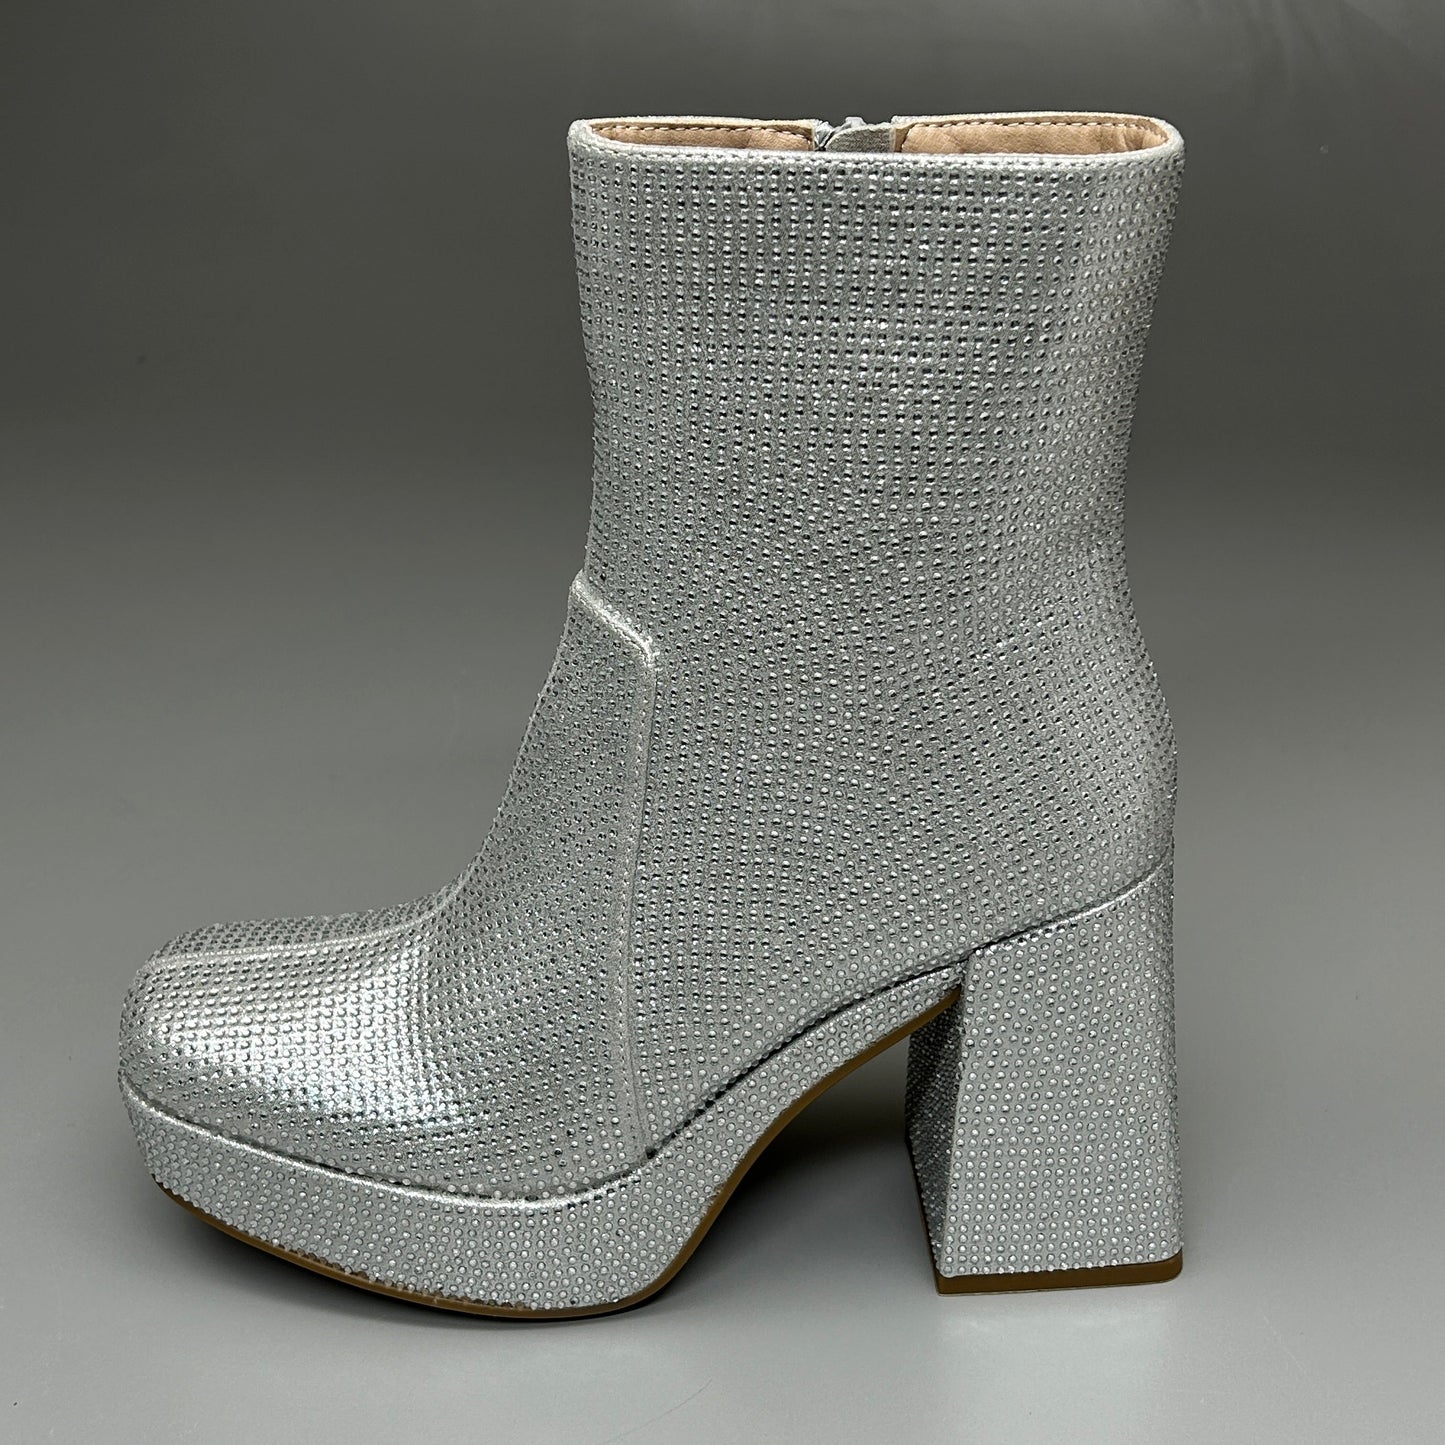 MIA Iva Silver Stone Heeled Boots Women's Sz 9 Silver GS1253108 (New)